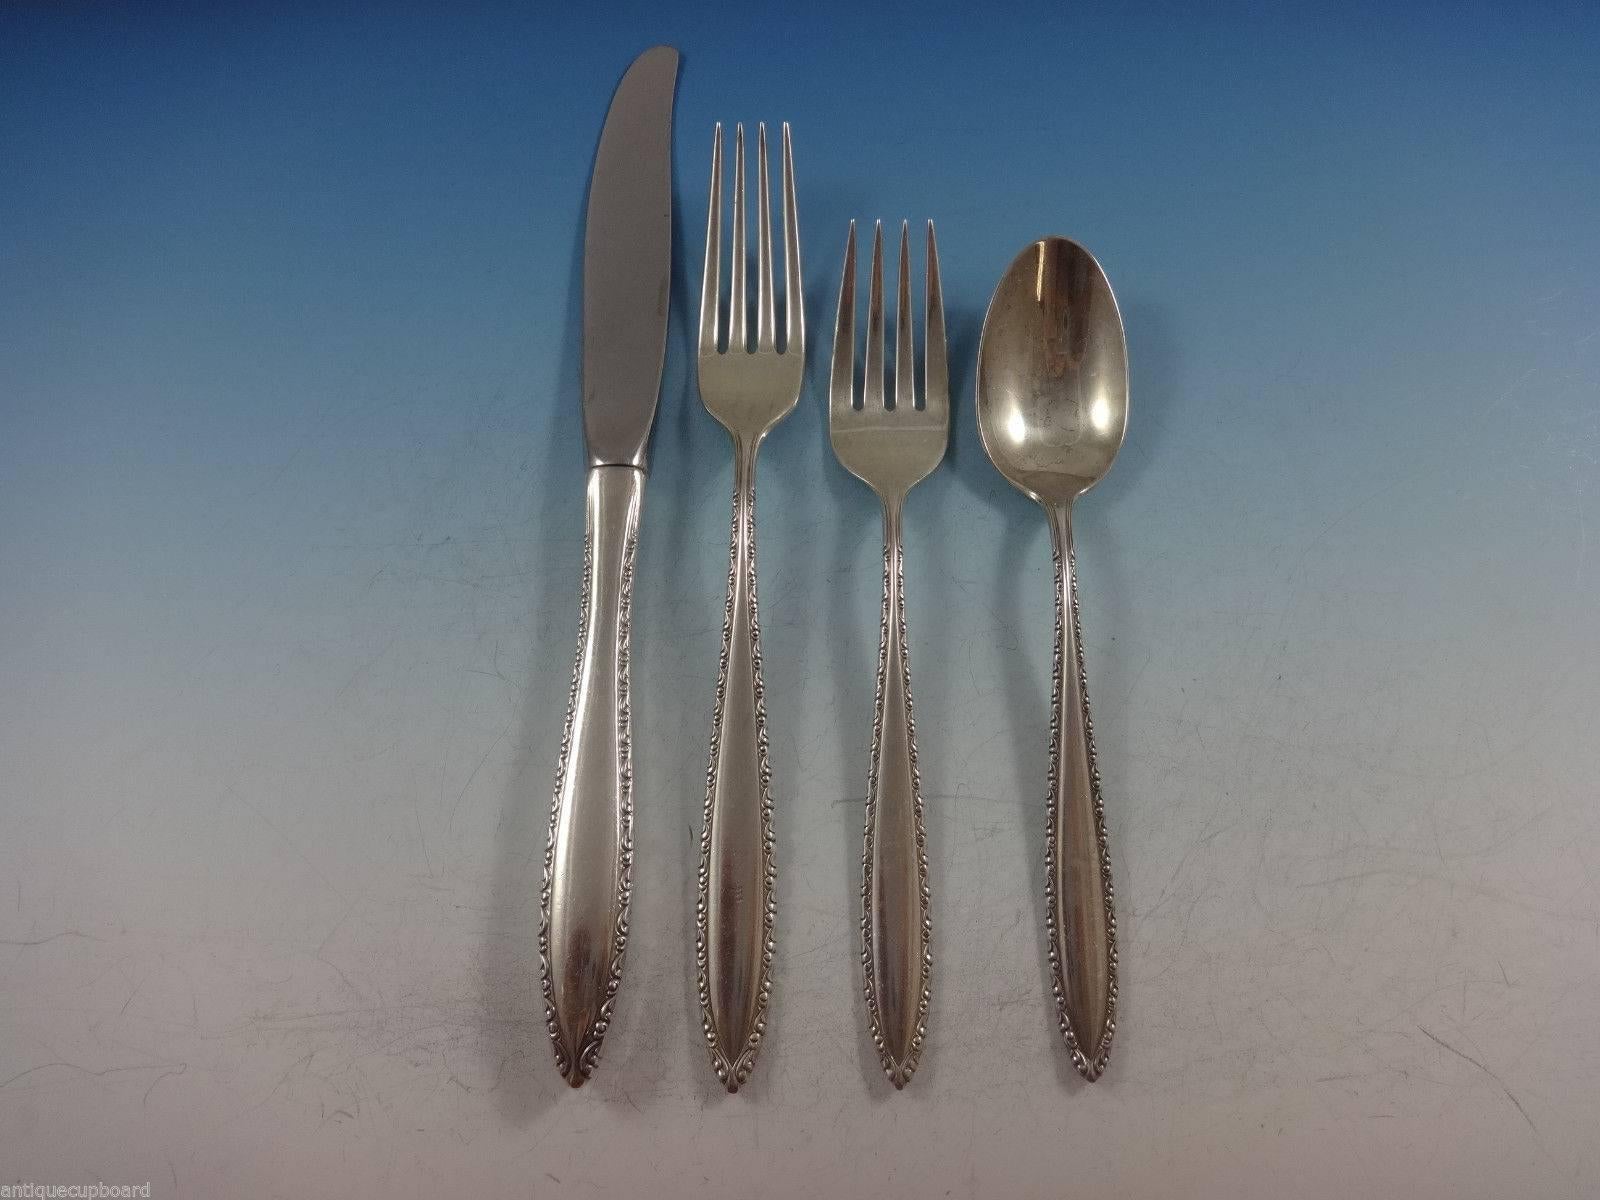 Beautiful Michele by Wallace sterling silver flatware set, 35 pieces. This set includes:

Eight knives, 9